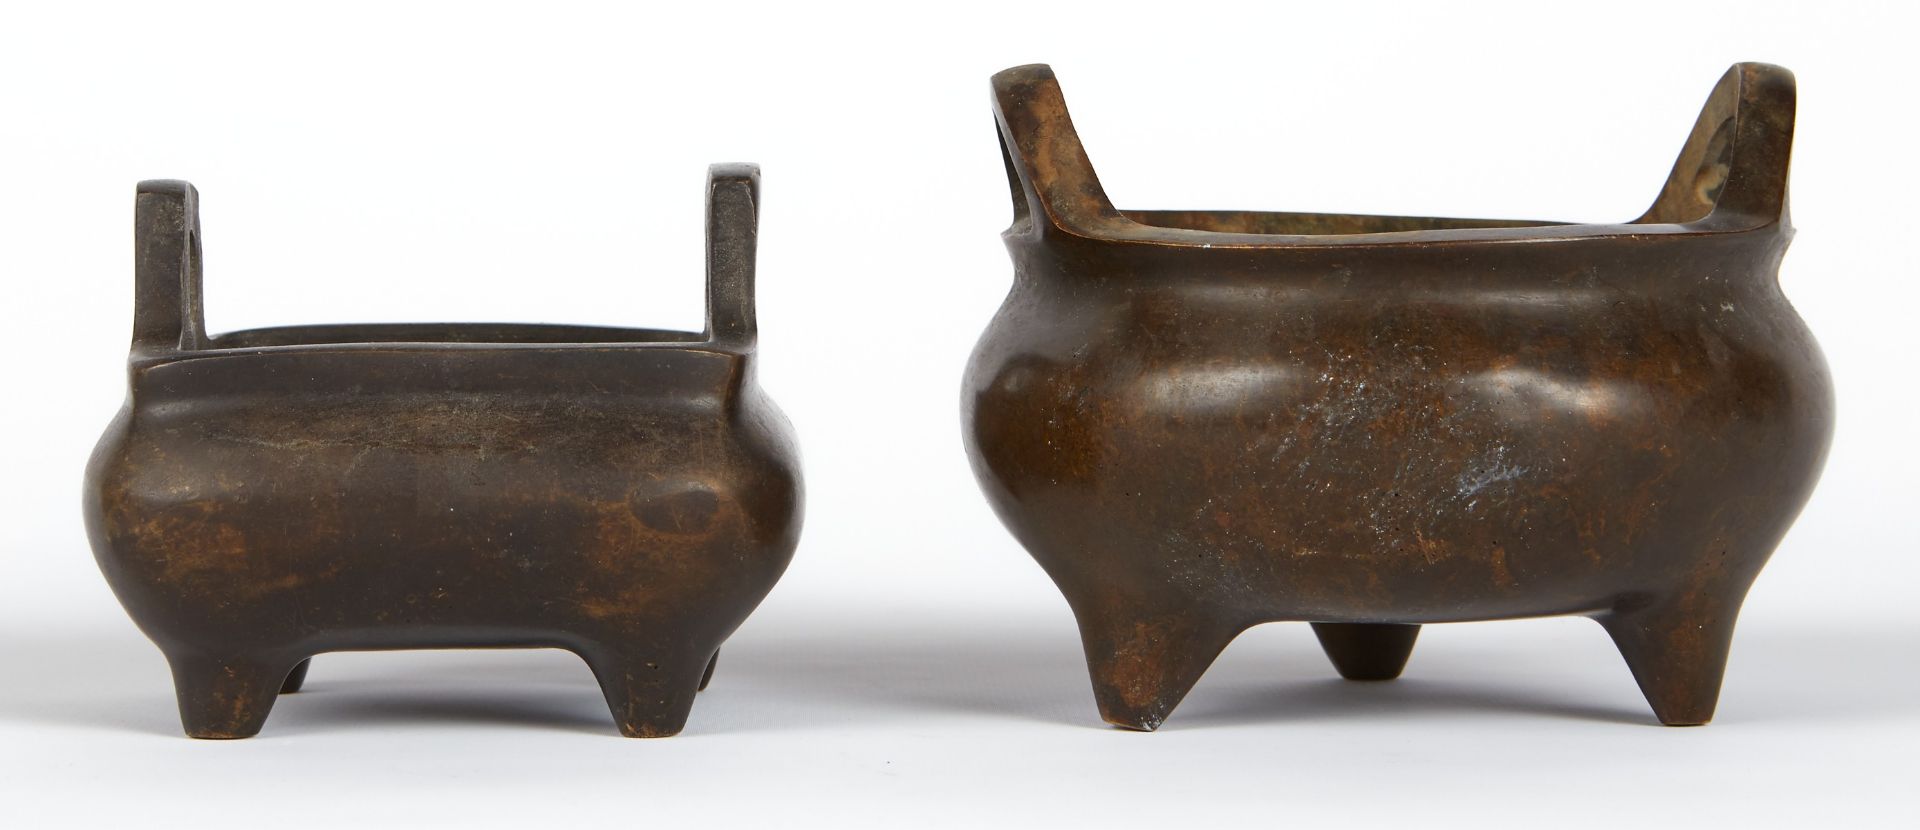 Grp: 2 Chinese Bronze Censers - Image 2 of 8